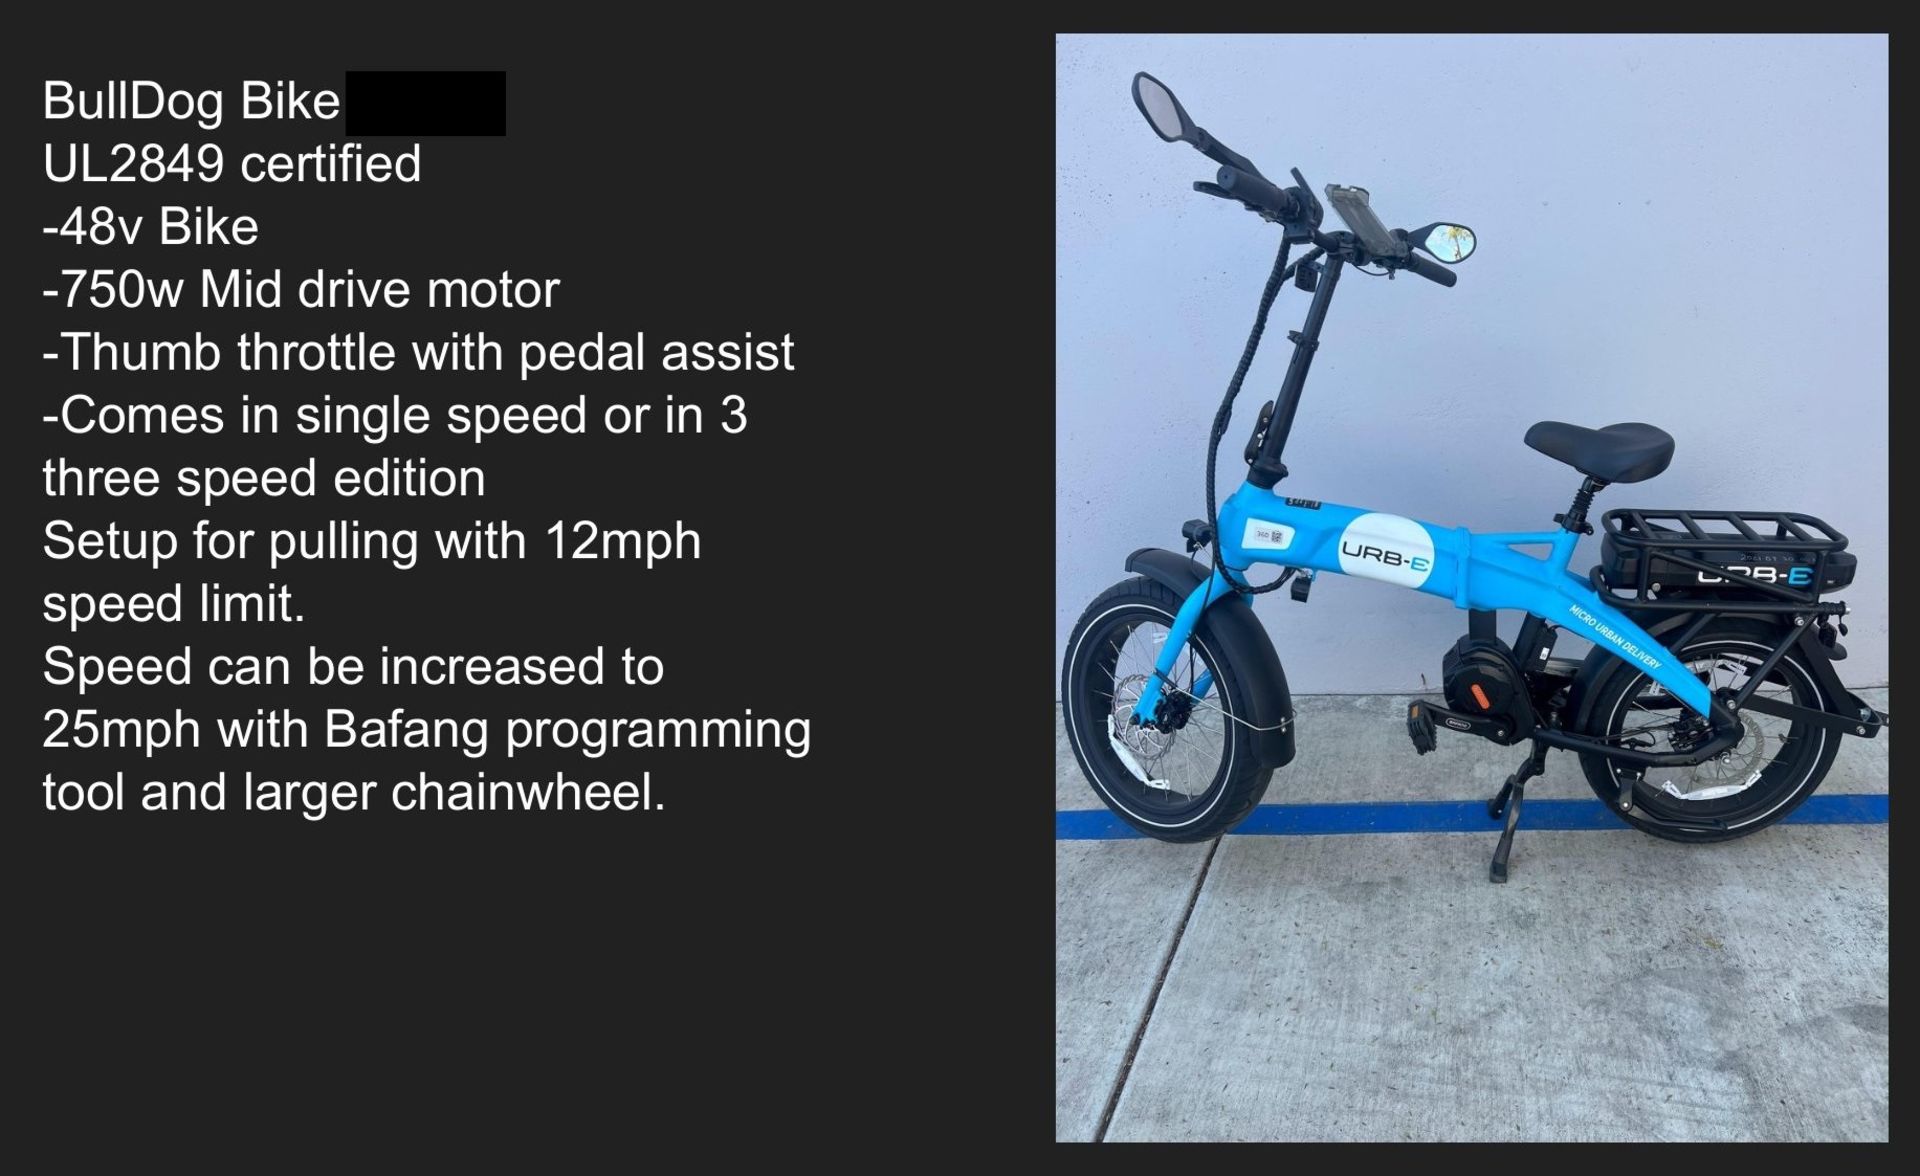 URB-E ELECTRIC DELIVERY BIKE, NEW, 750W MID DRIVE MOTOR, THREE SPEED, THUMB THROTTLE WITH PEDAL - Image 6 of 6